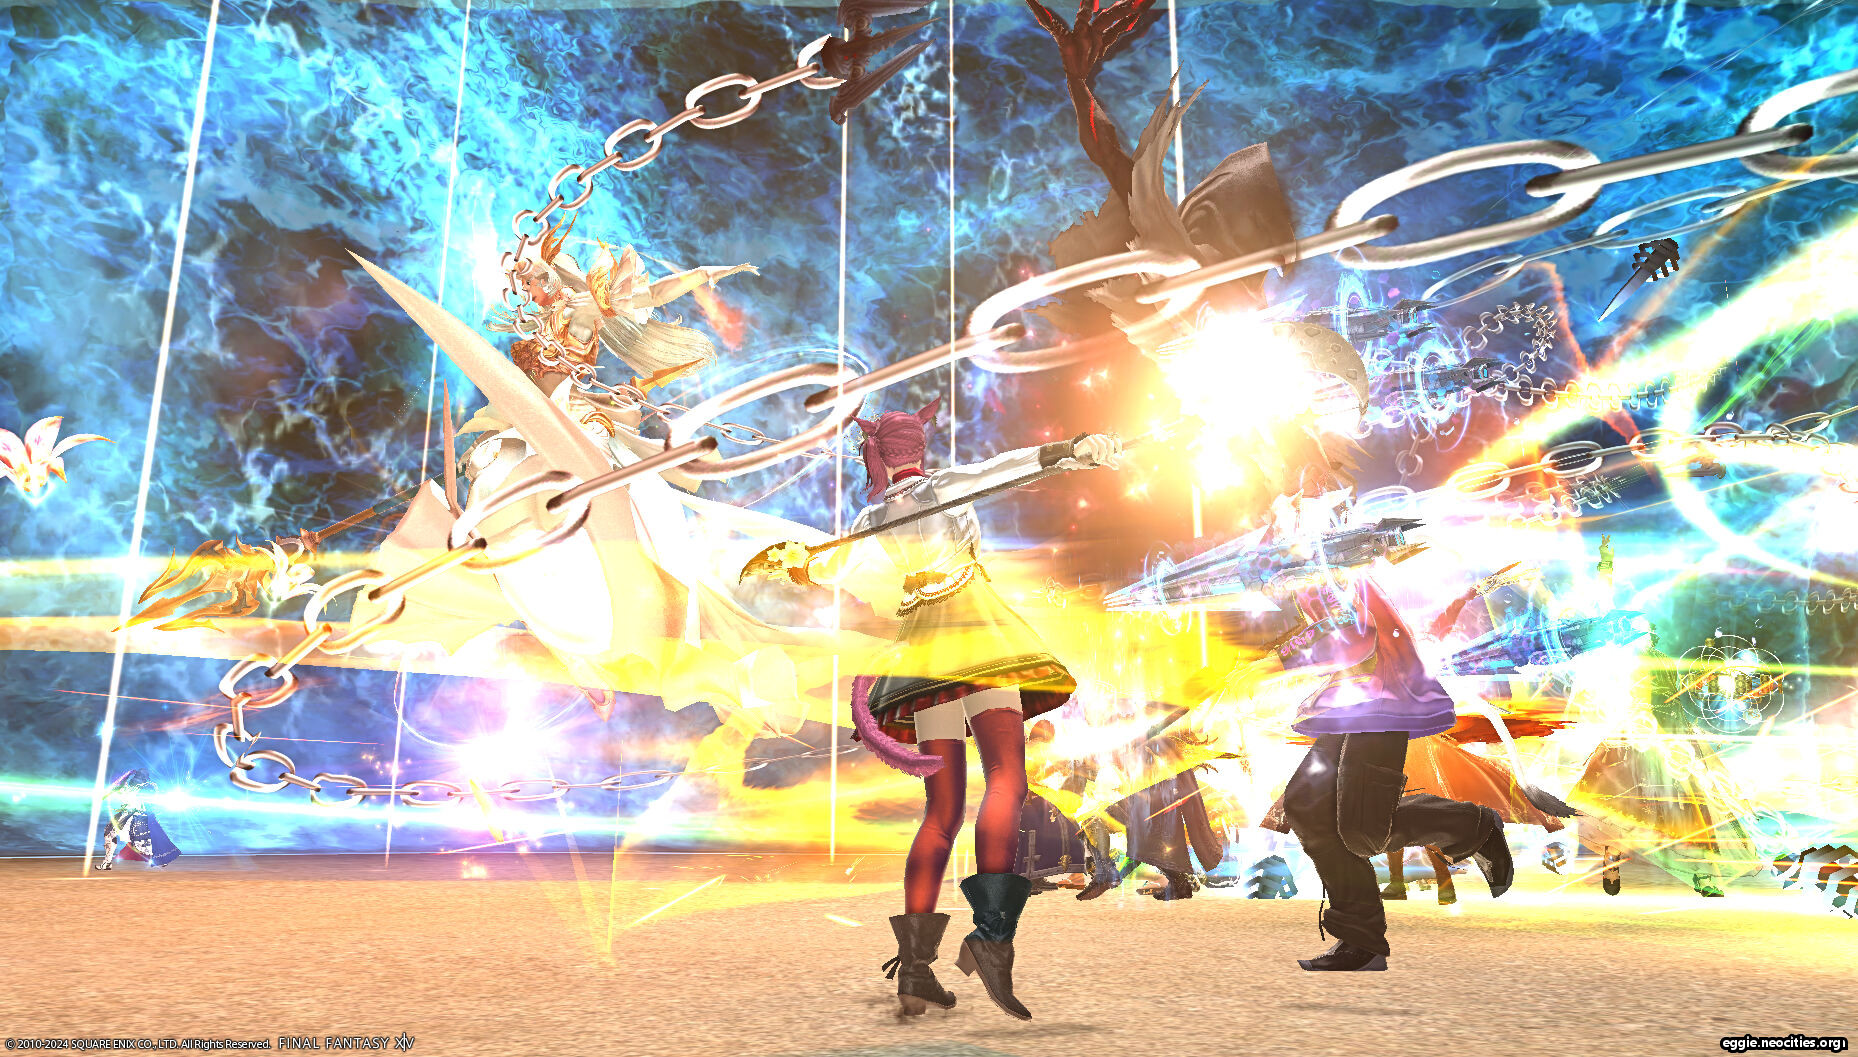 Zel during the Lymllaen fight. There are chains going across the screen from player attack animations.